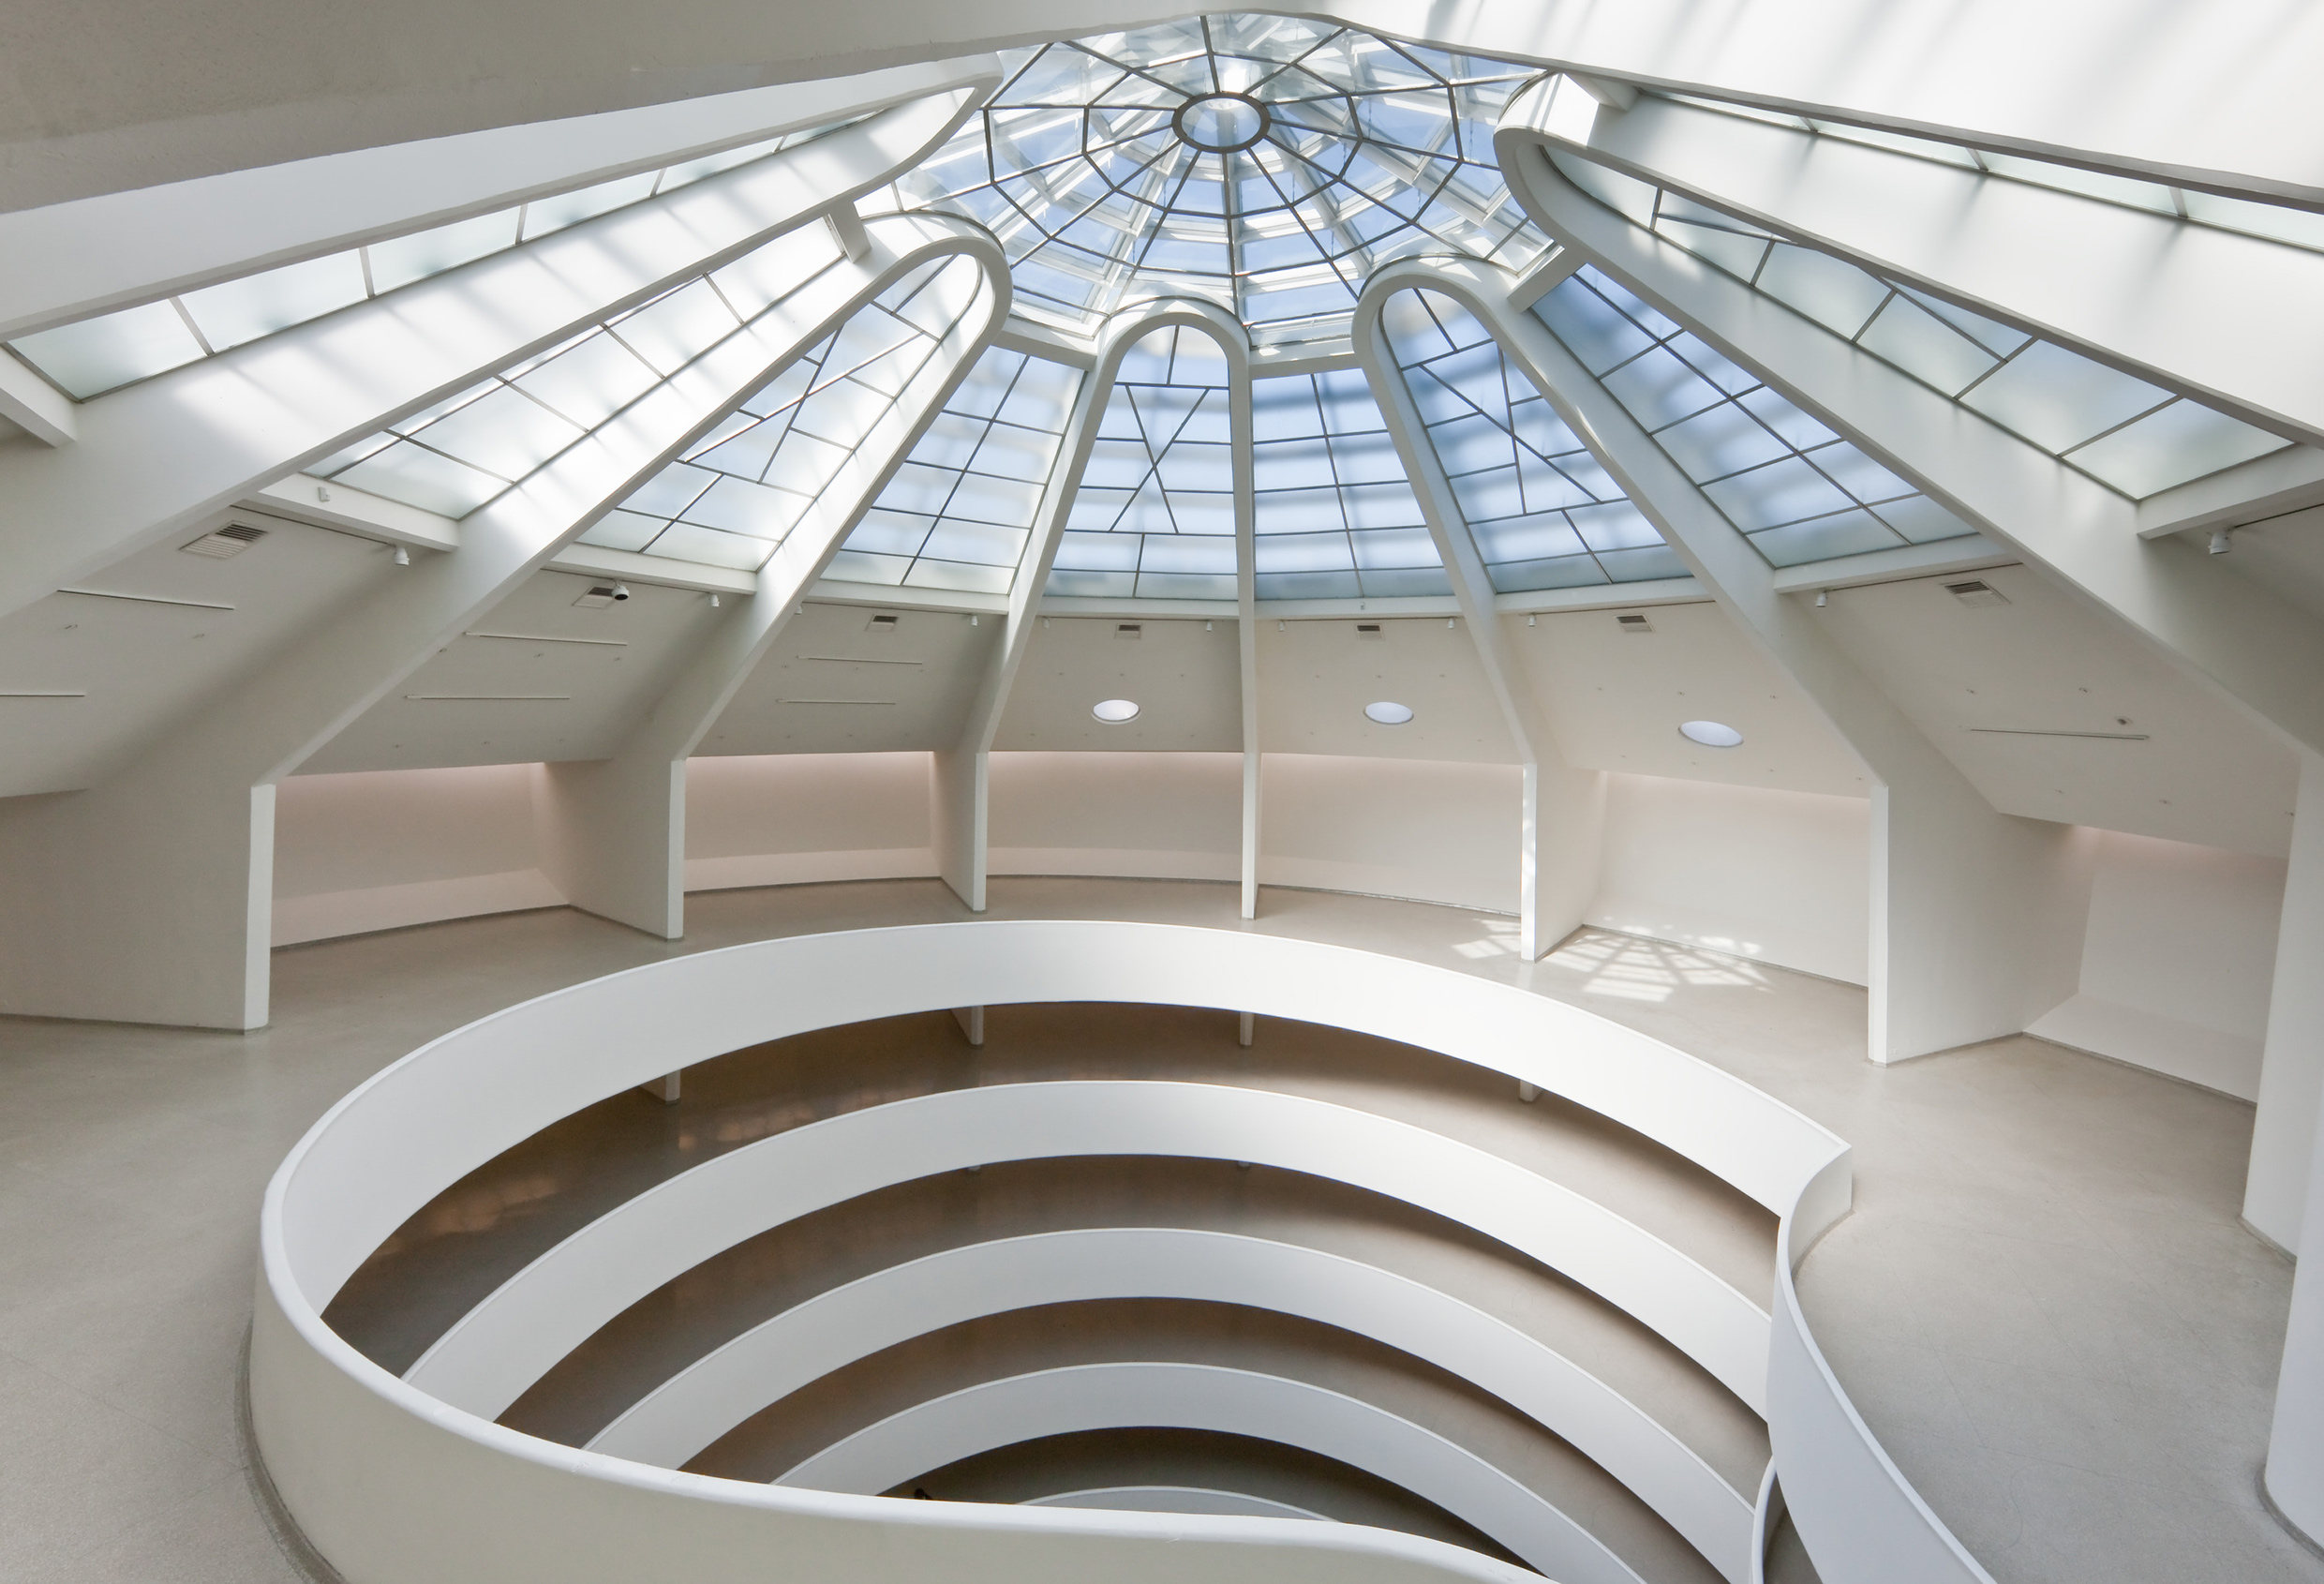 The Frank Lloyd Wright Building | The Guggenheim Museums and Foundation